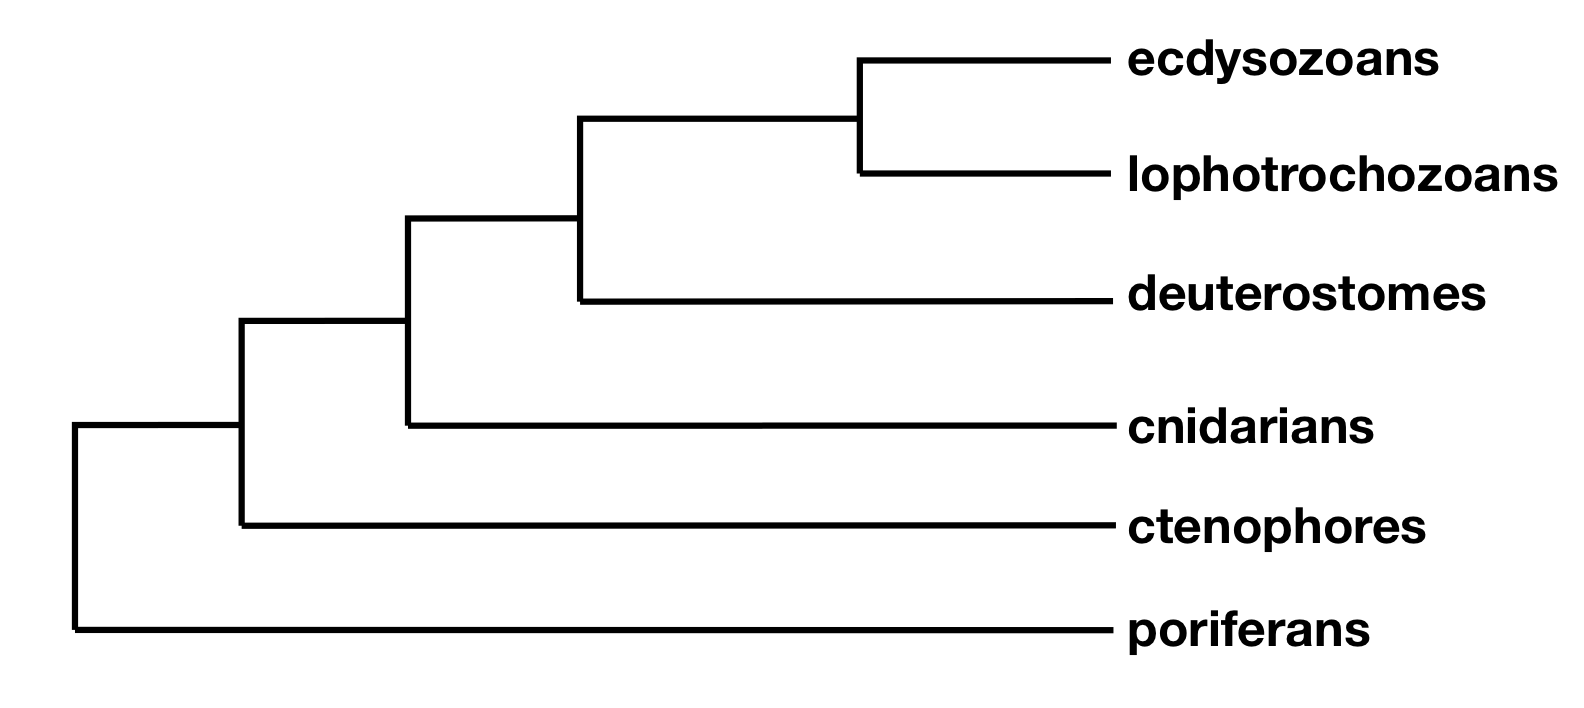 Phylogenetic tree showing the major clades of animals